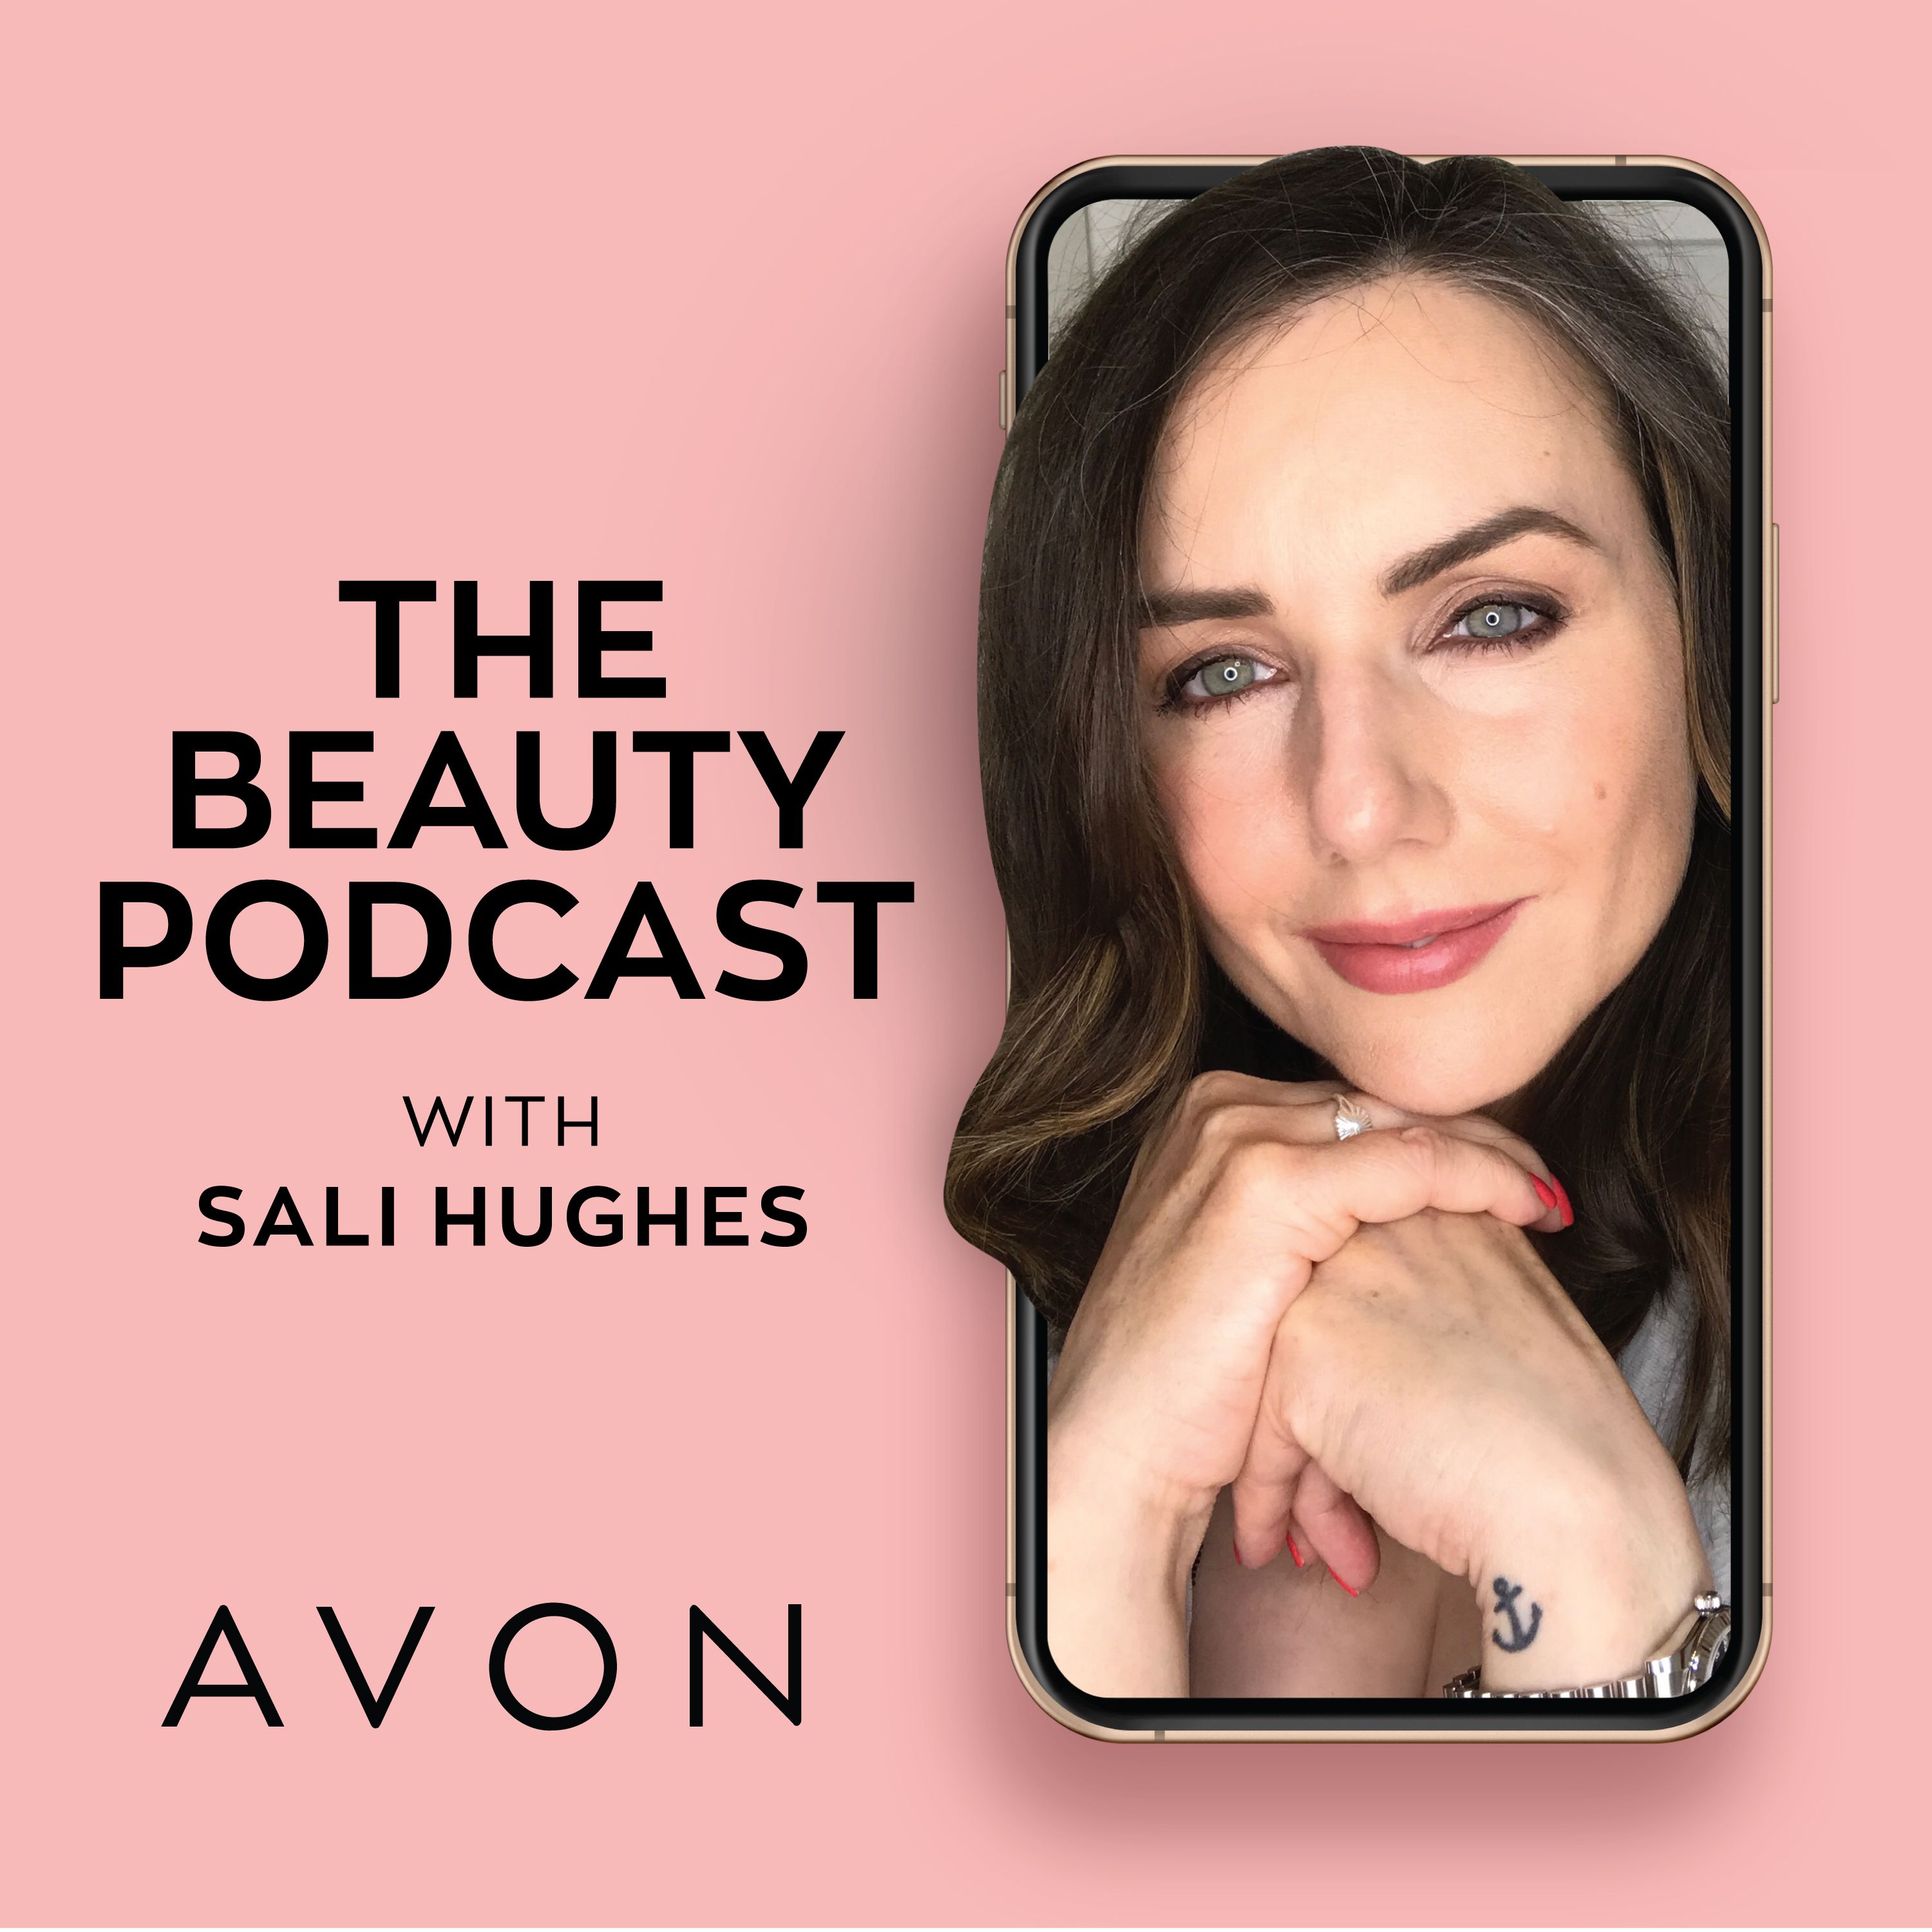 The Beauty Podcast